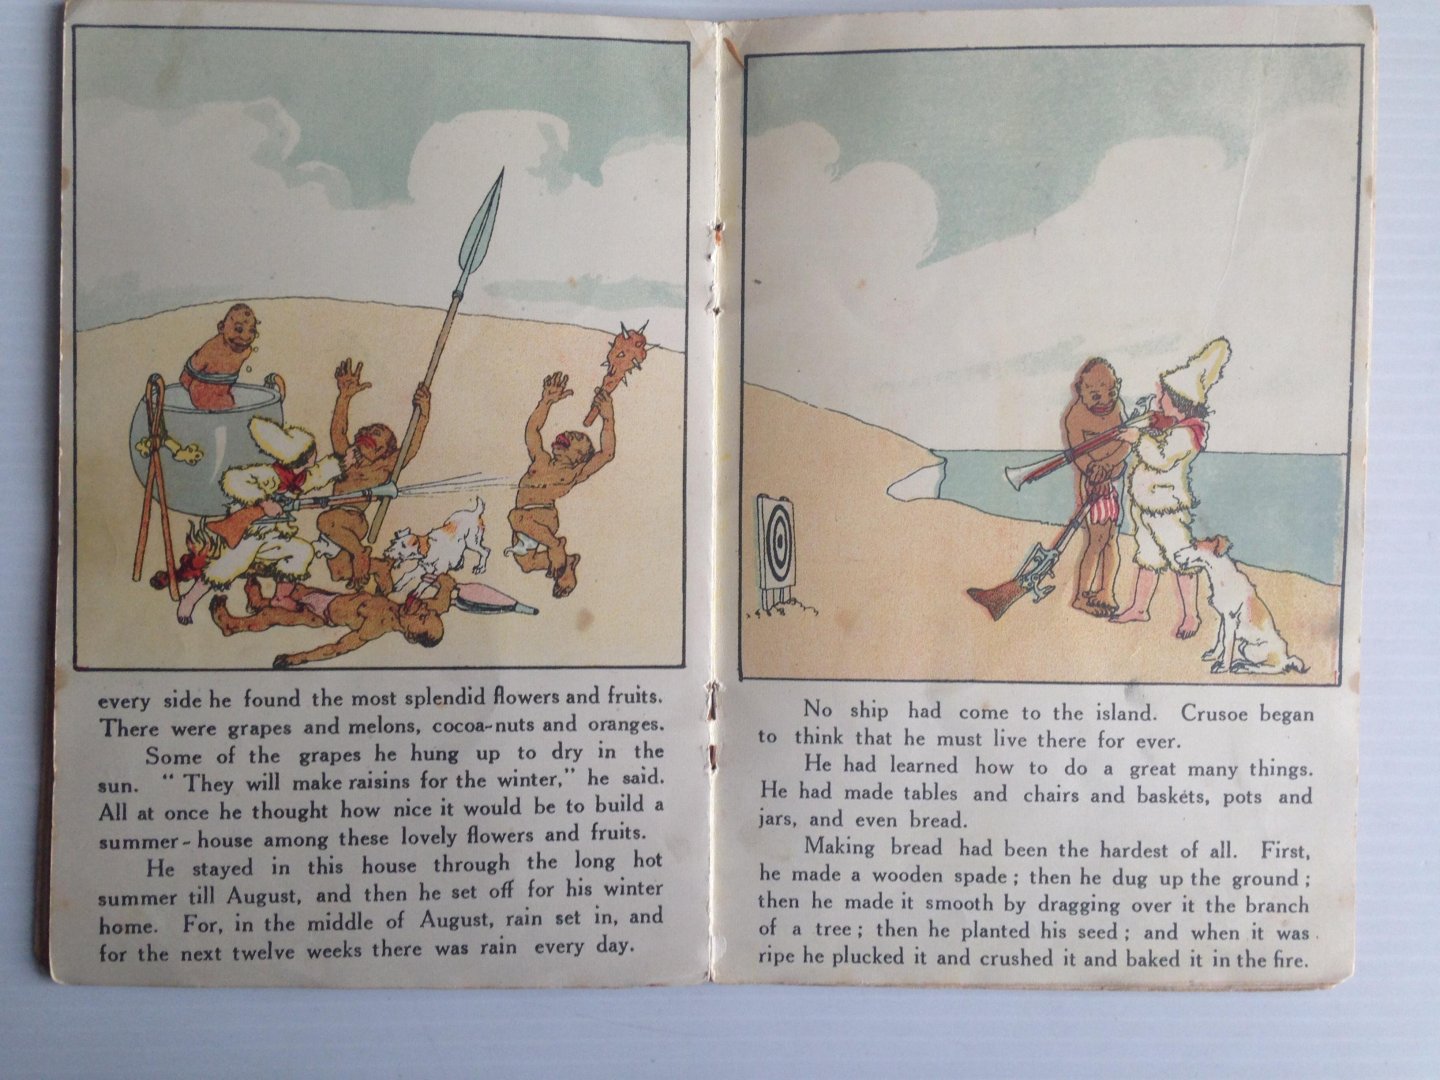  - Robinson Crusoe, pictures by Willy Pogany